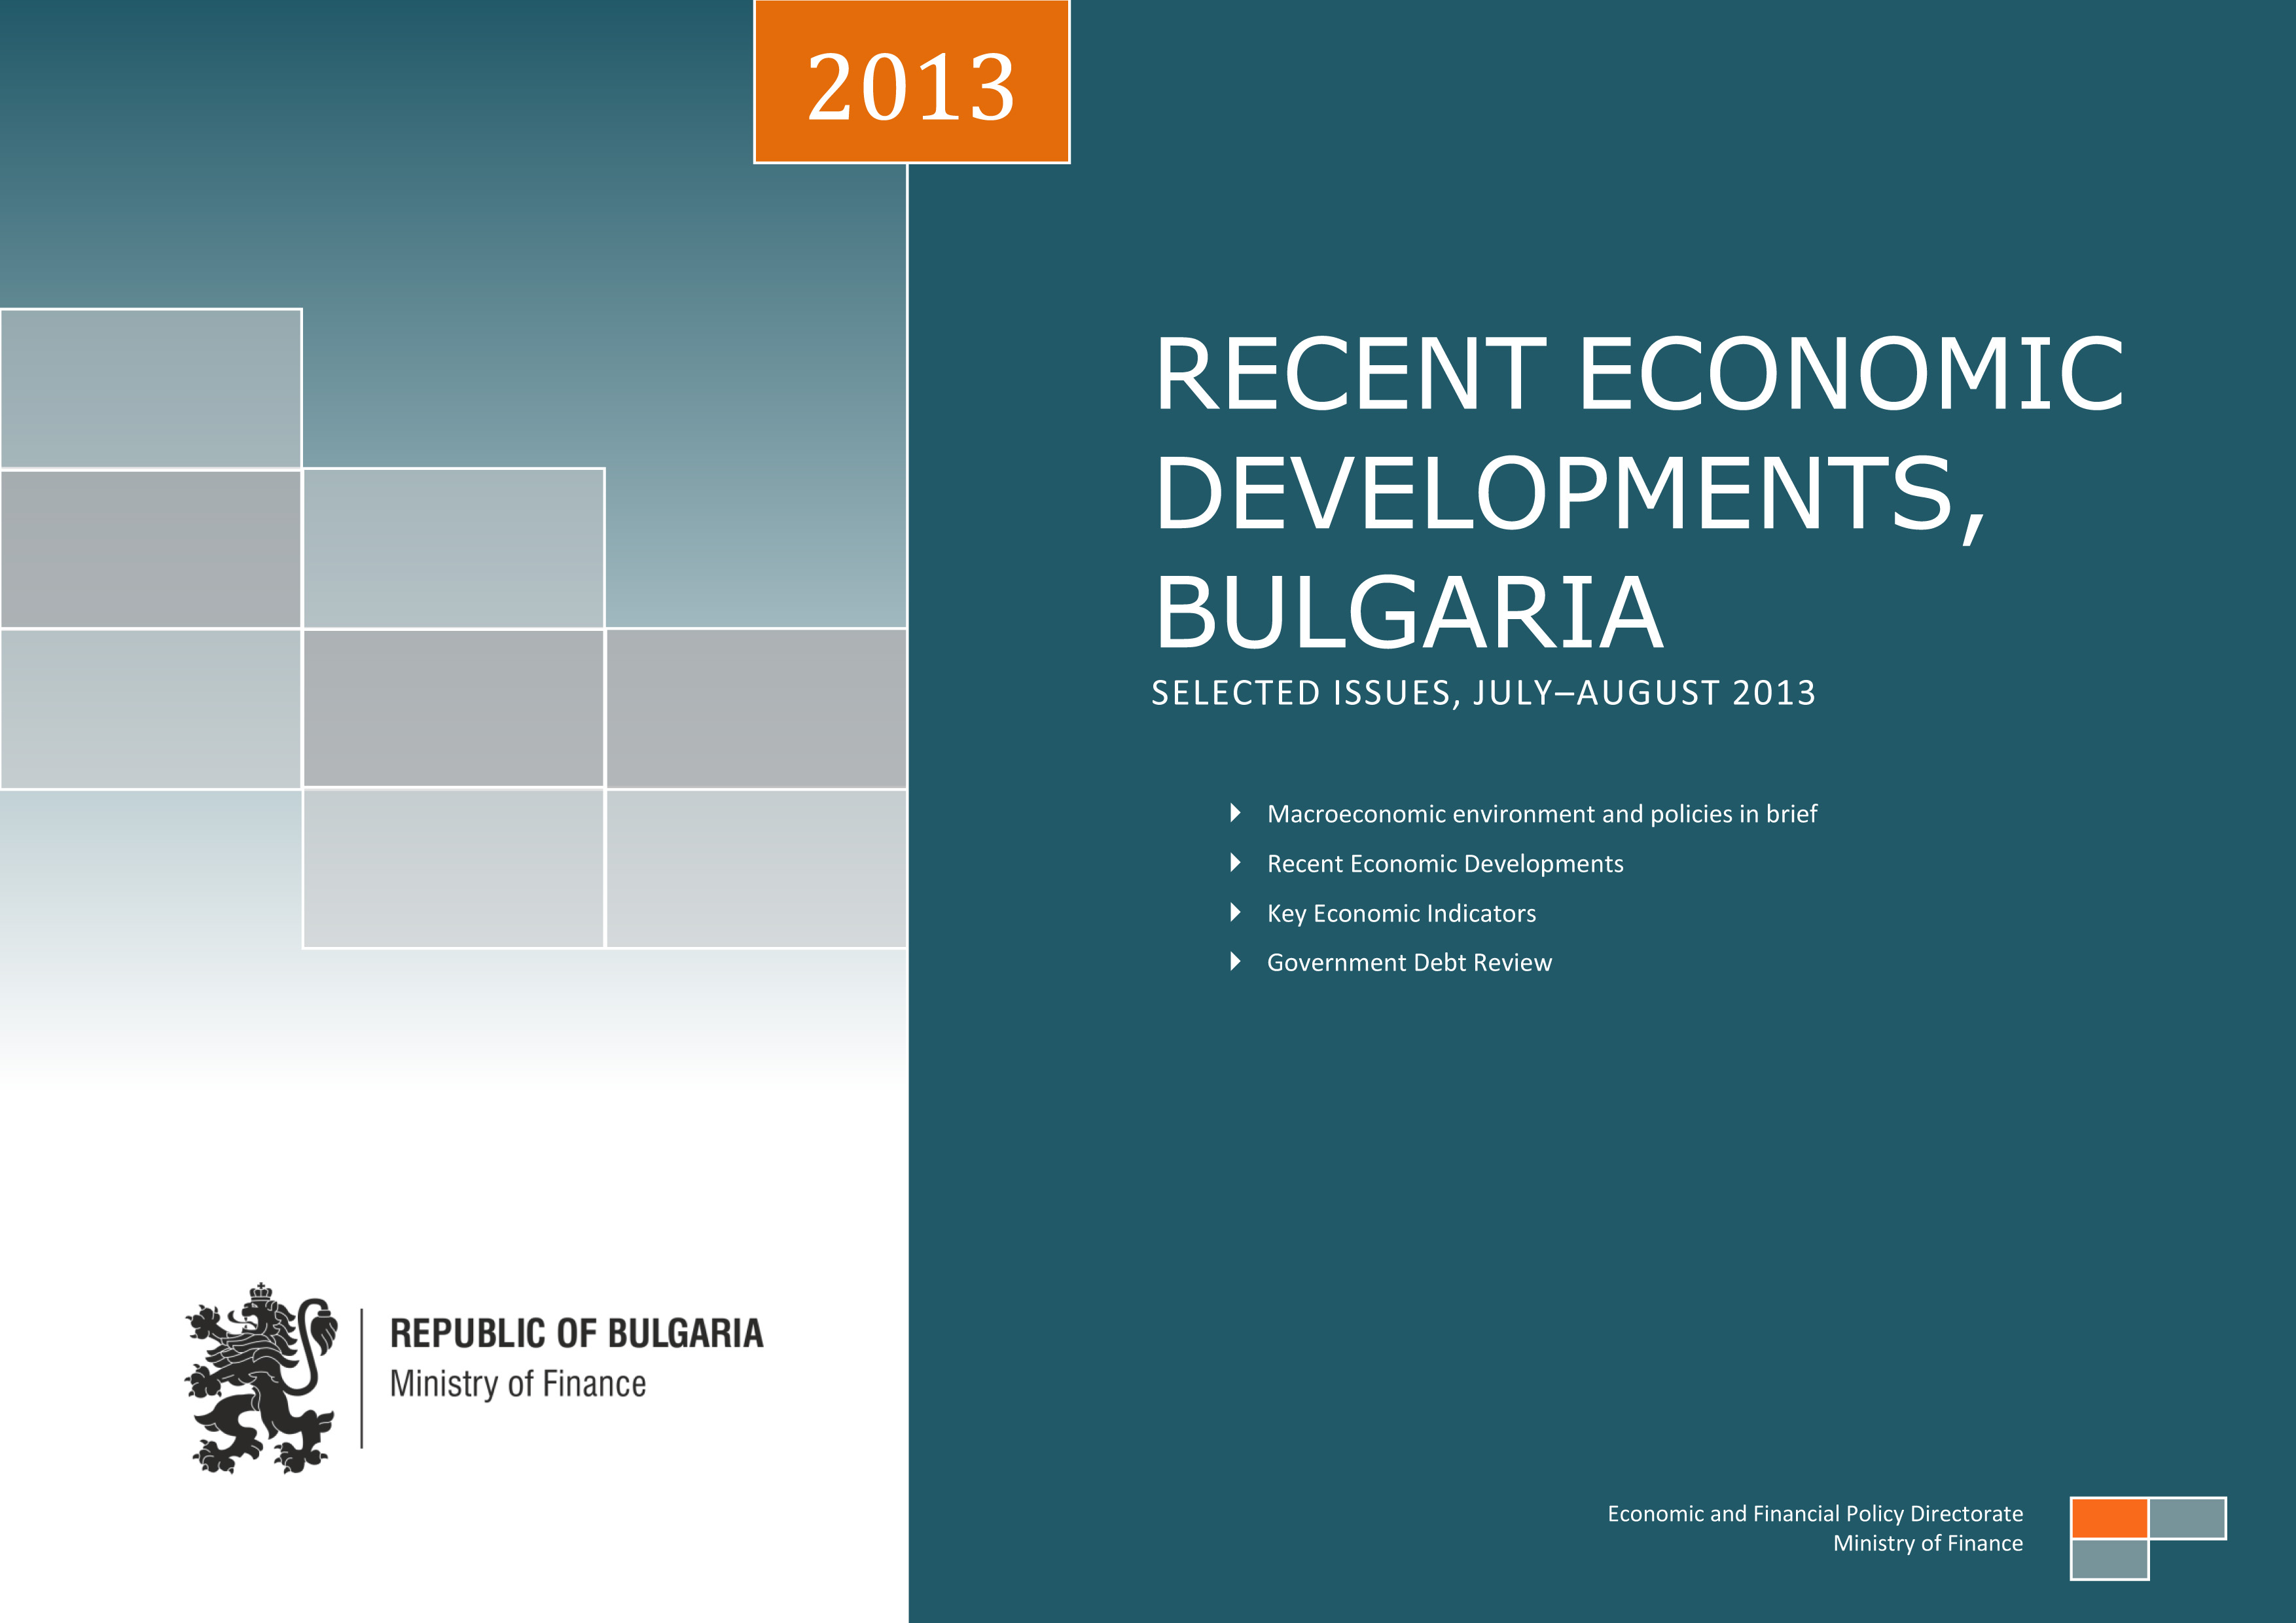 THE LATEST ISSUE OF THE MONTHLY REPORT ON THE BULGARIAN ECONOMY HAS BEEN RELEASED